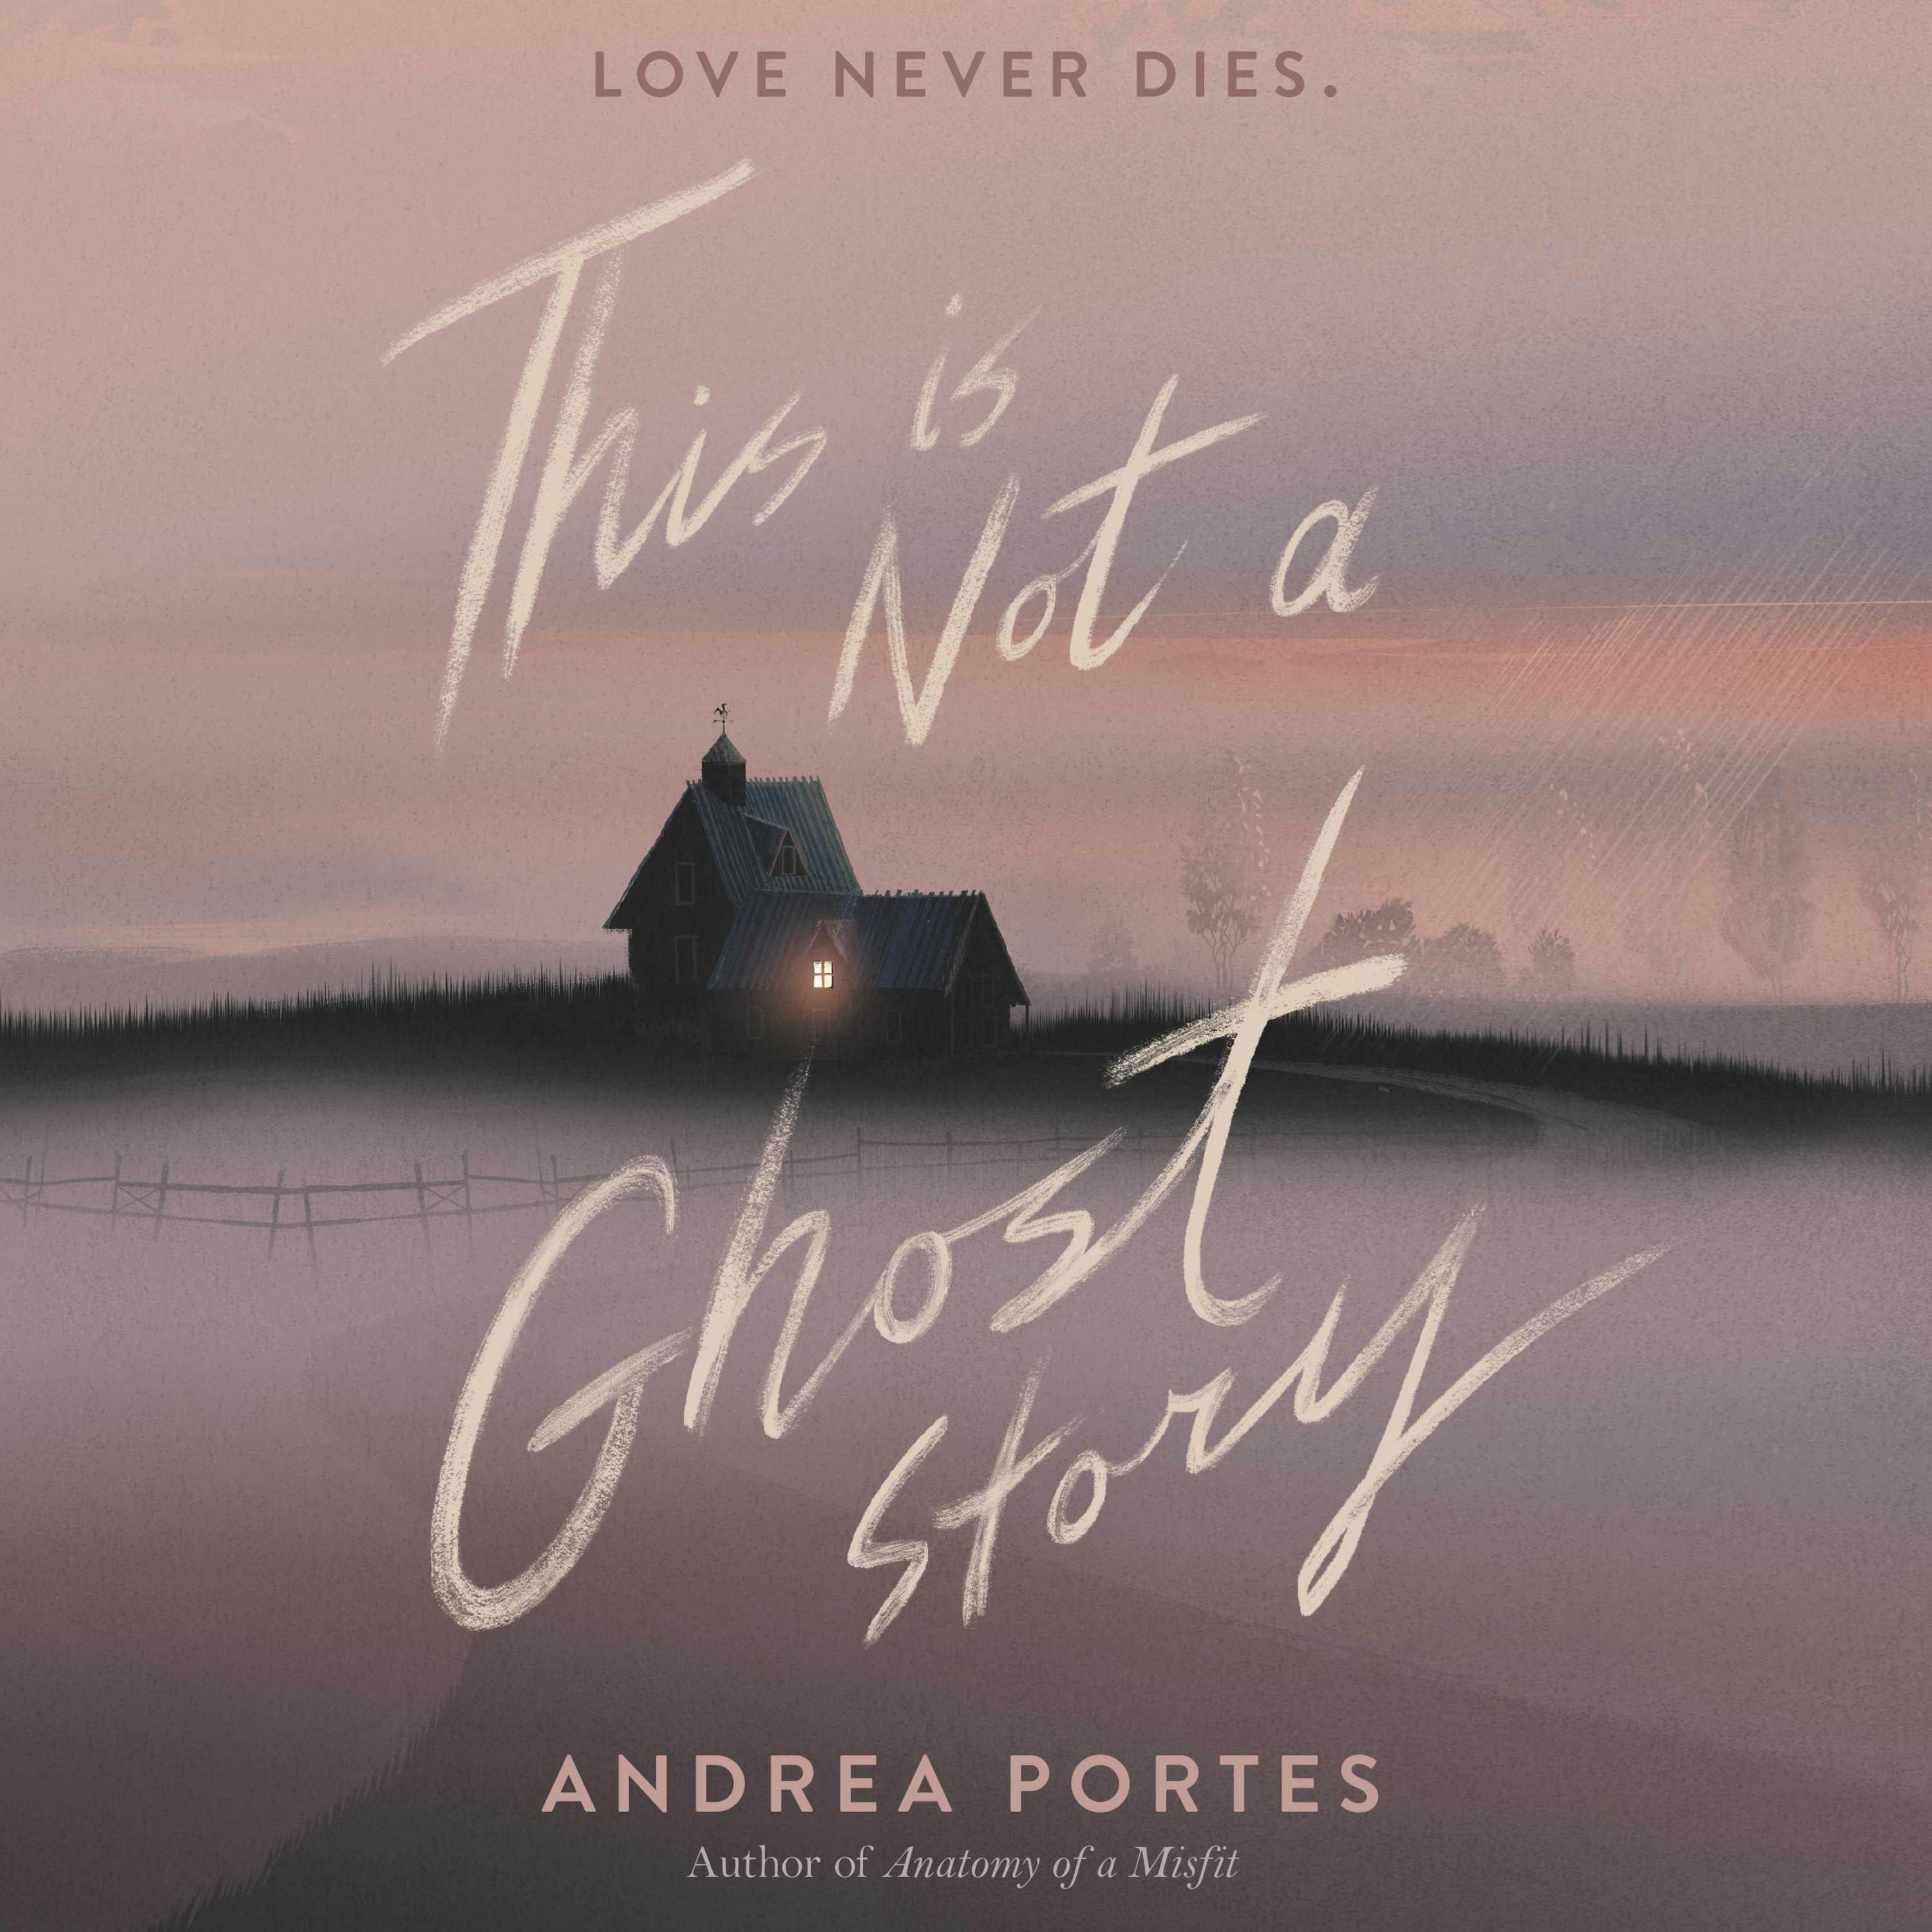 This Is Not a Ghost Story - Andrea Portes